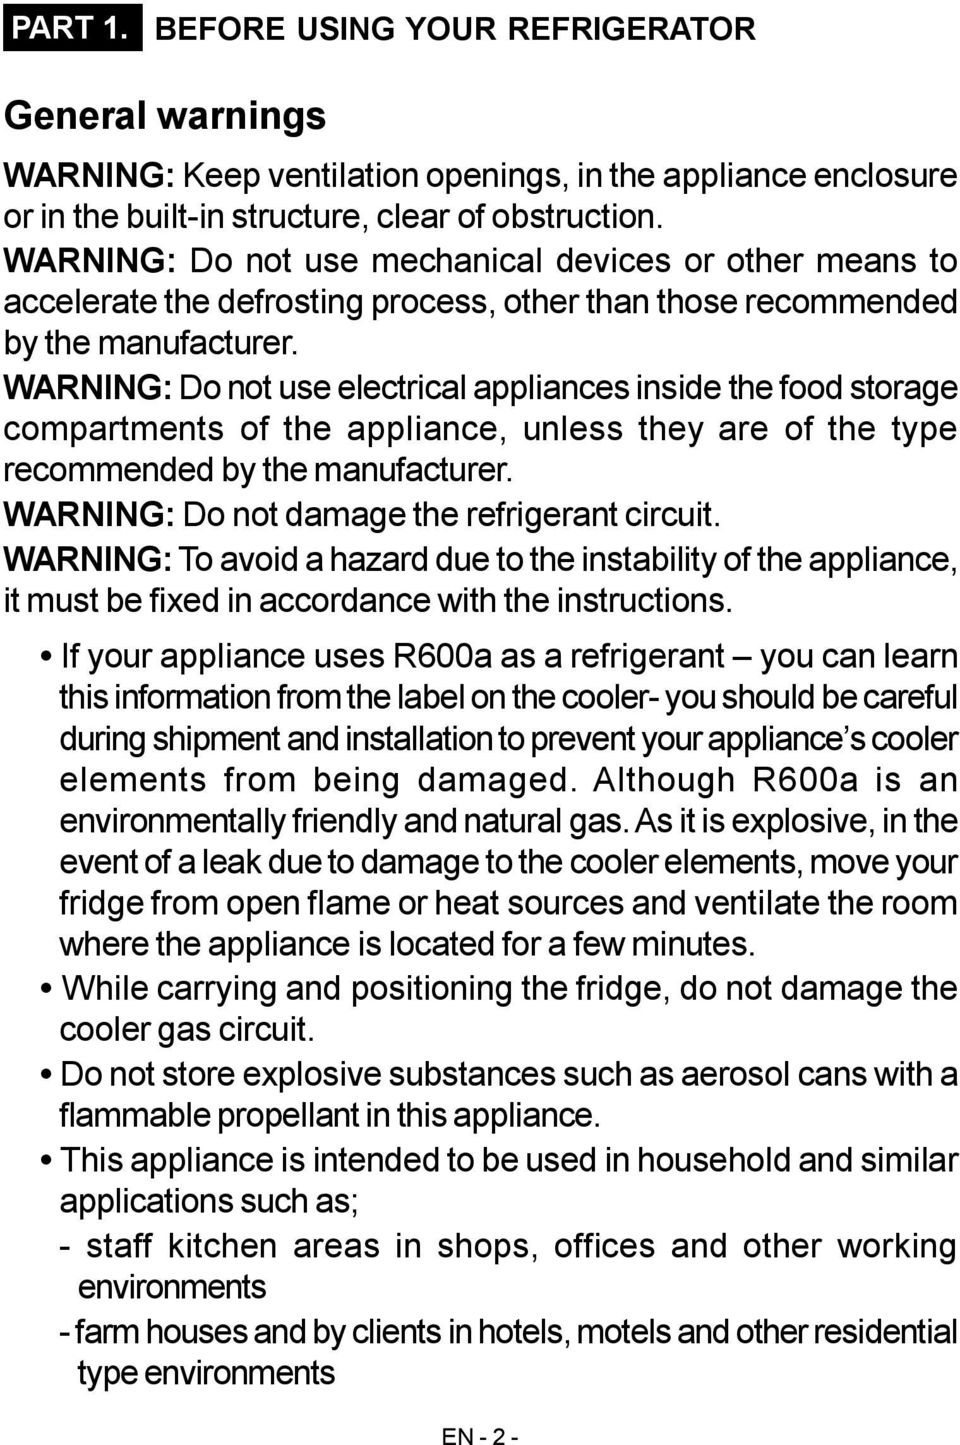 WARNING: Do not use electrical appliances inside the food storage compartments of the appliance, unless they are of the type recommended by the manufacturer.